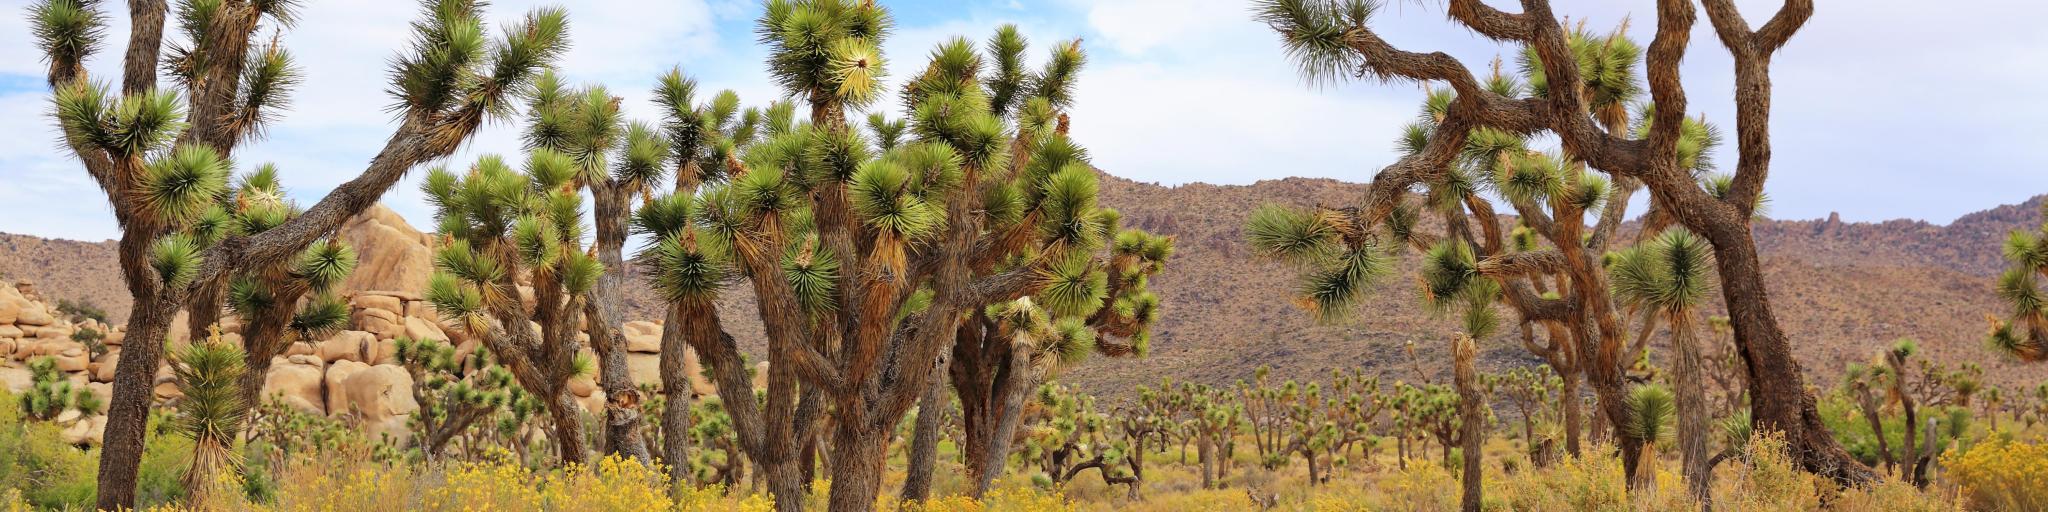 The Wall Street Mill Trail in Joshua Tree National Park is lined with the park's namesake trees.